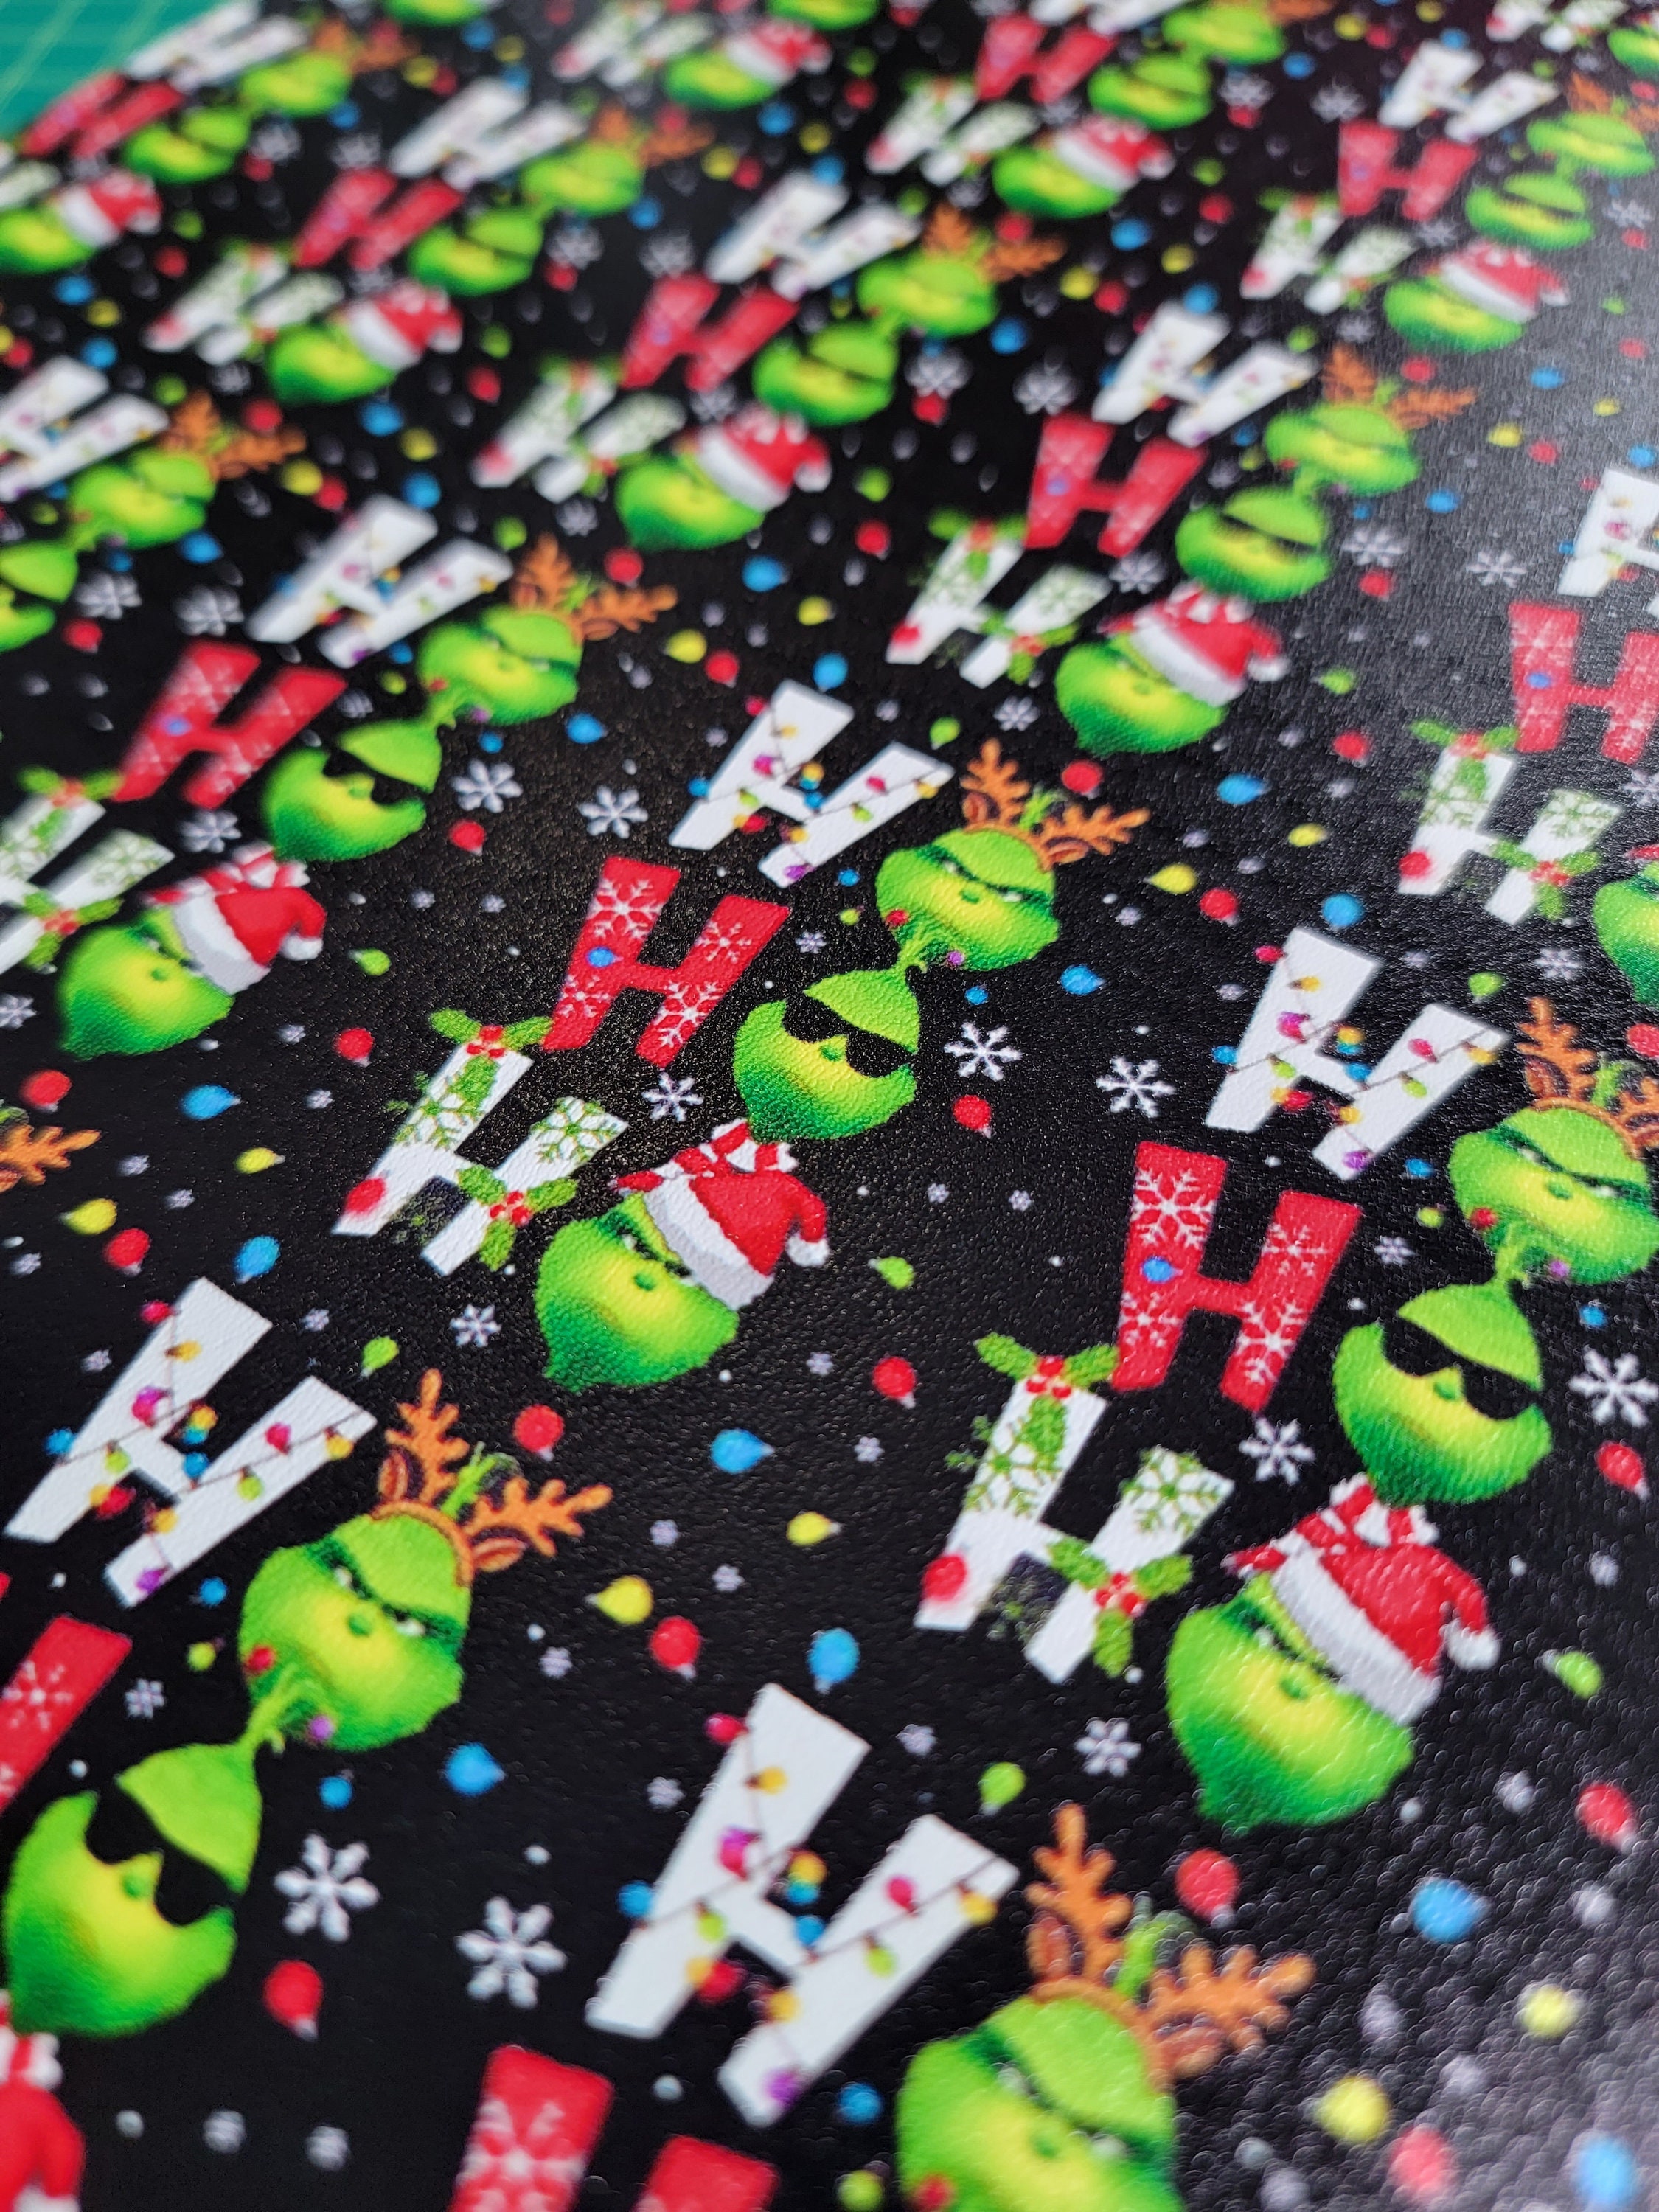 8x11, The Grinch Synthetic Leather, Custom Leather Sheets, Christmas  Leather, Louis Vuitton Leather Sheet, Faux Leather, Synthetic Leather  Sheet, Litchi, Glitter, Patent, Vinyl, DIY Hair Bows, 1 Sheet - Jennifer's  Goodies Galore